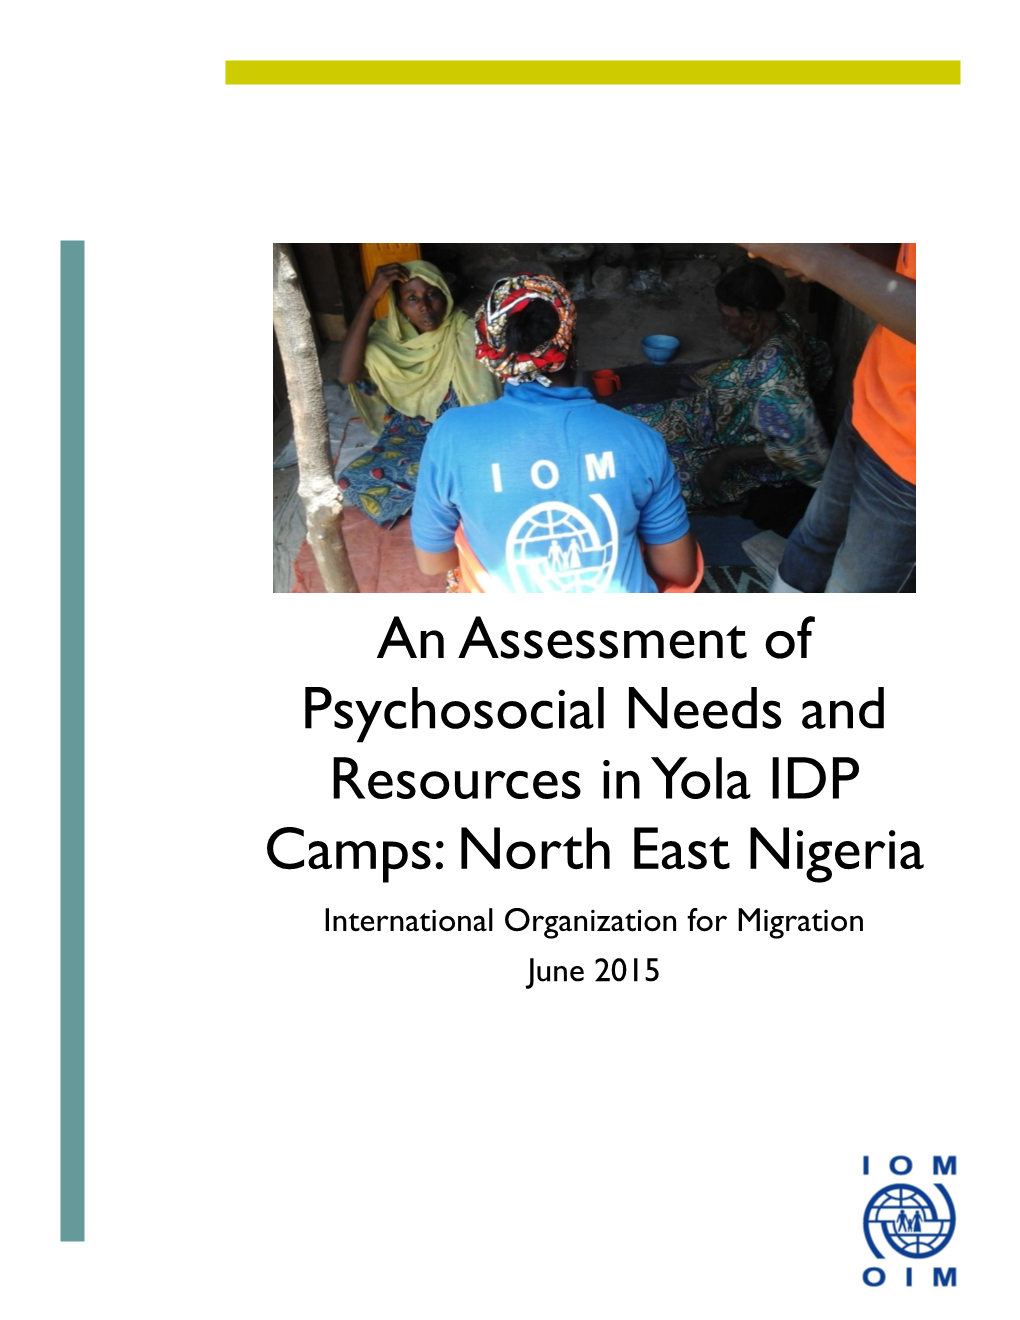 An Assessment of Psychosocial Needs and Resources in Yola IDP Camps: North East Nigeria International Organization for Migration June 2015